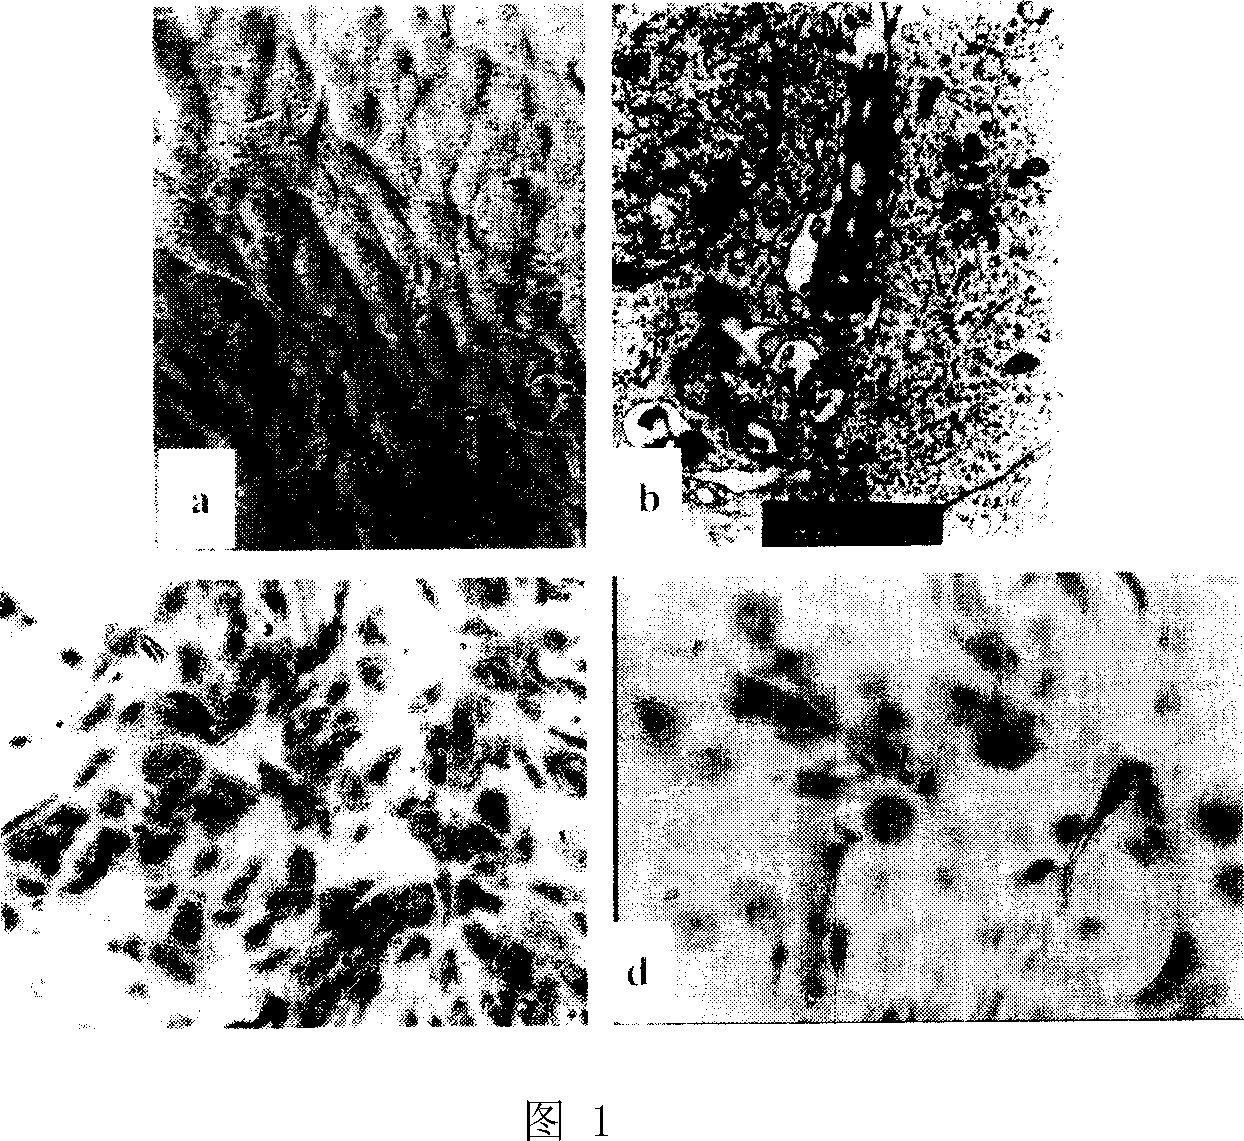 Method for constructing tissue engineering double-layered skin and the application thereof